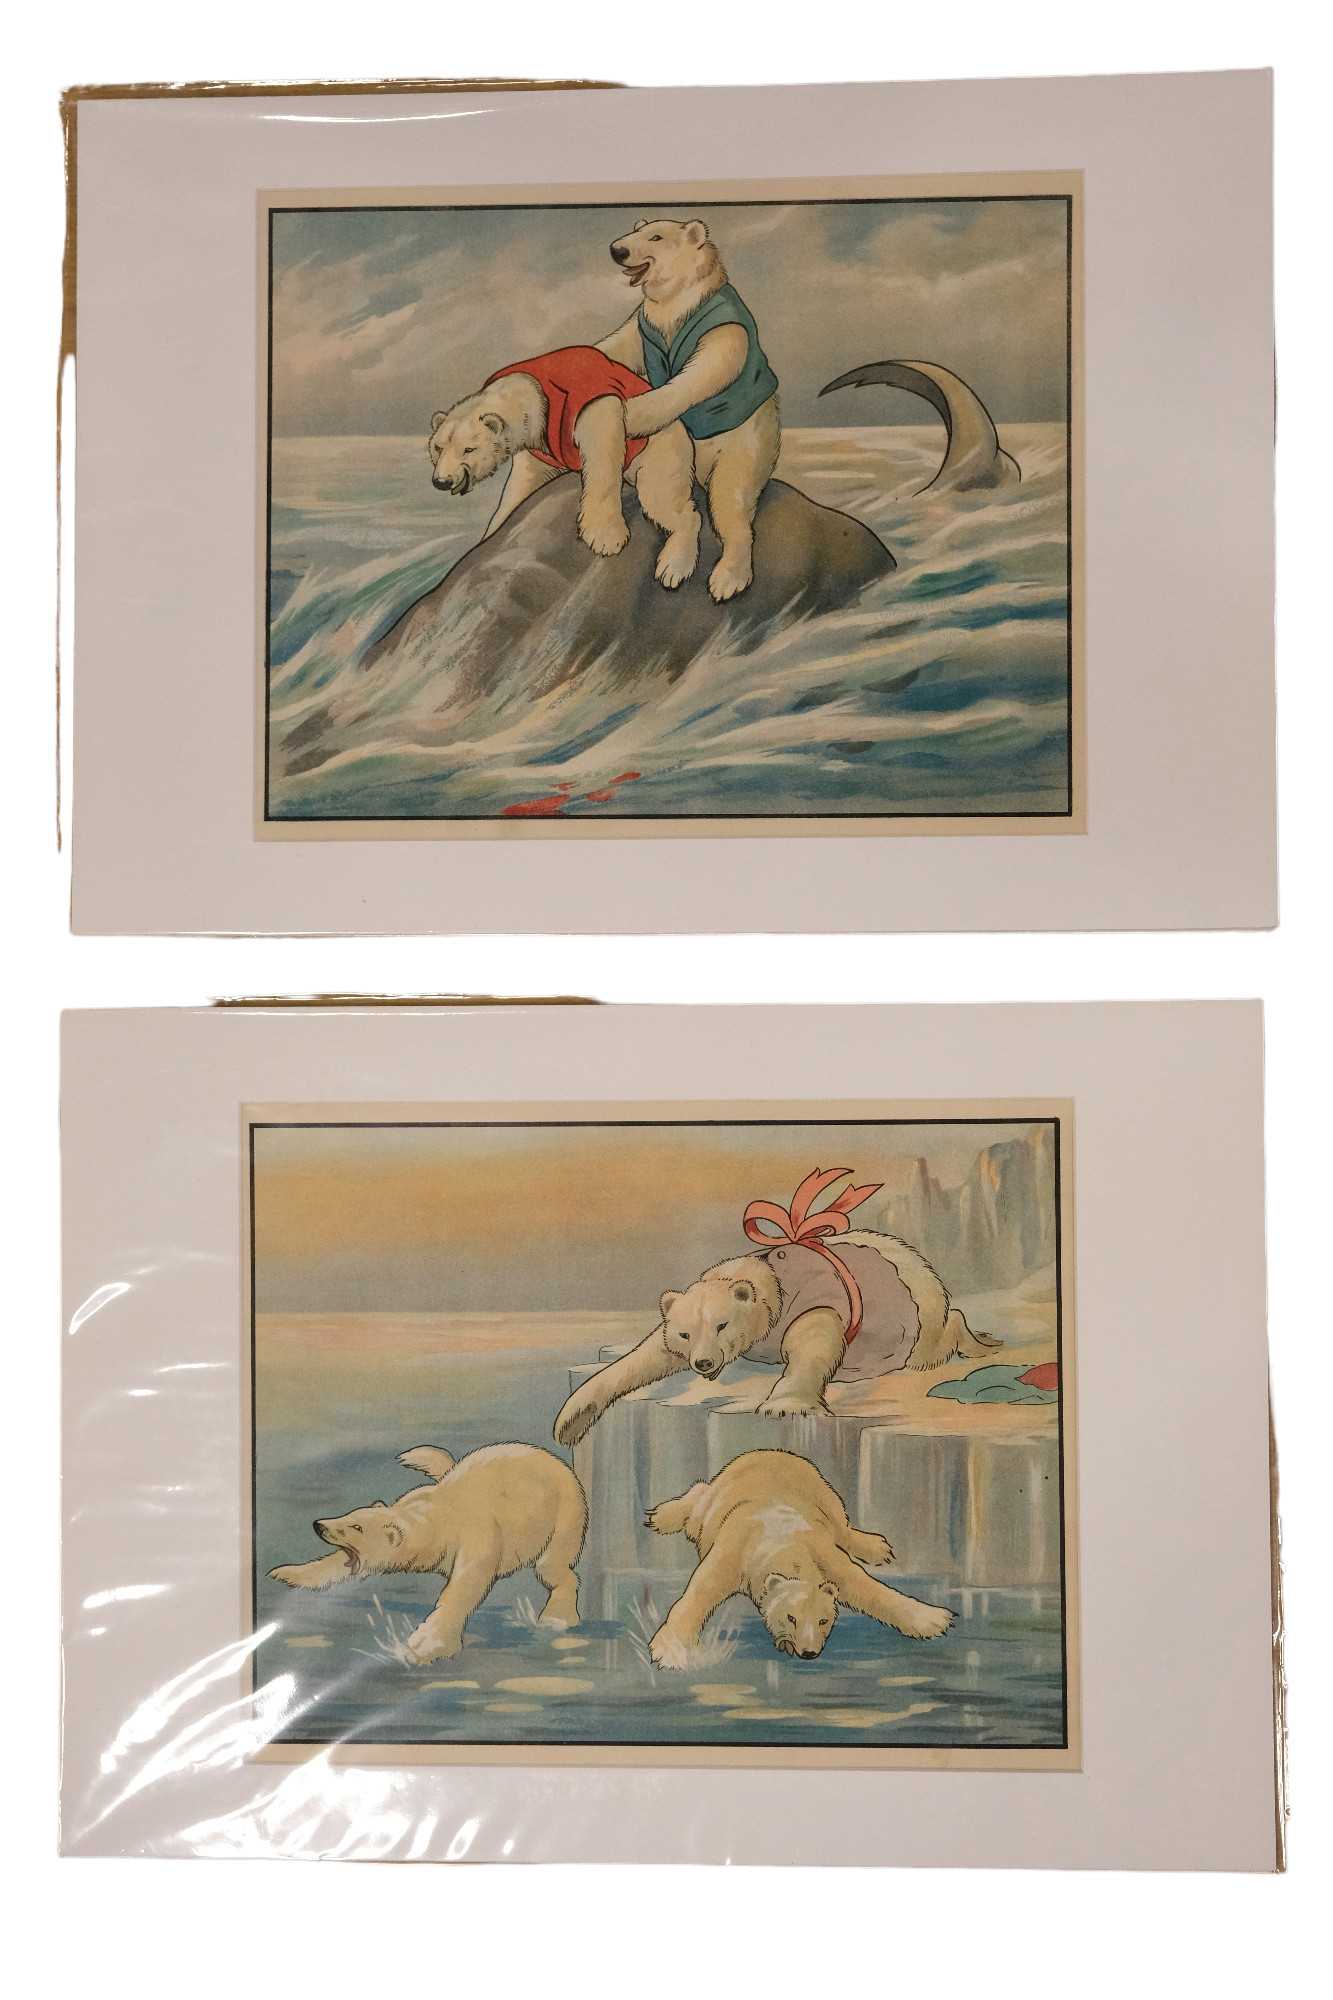 Bessie Nancy Parker (1872-1961) Nine studies from "Arctic Orphans", circa 1920, lithographic prints, - Image 5 of 5